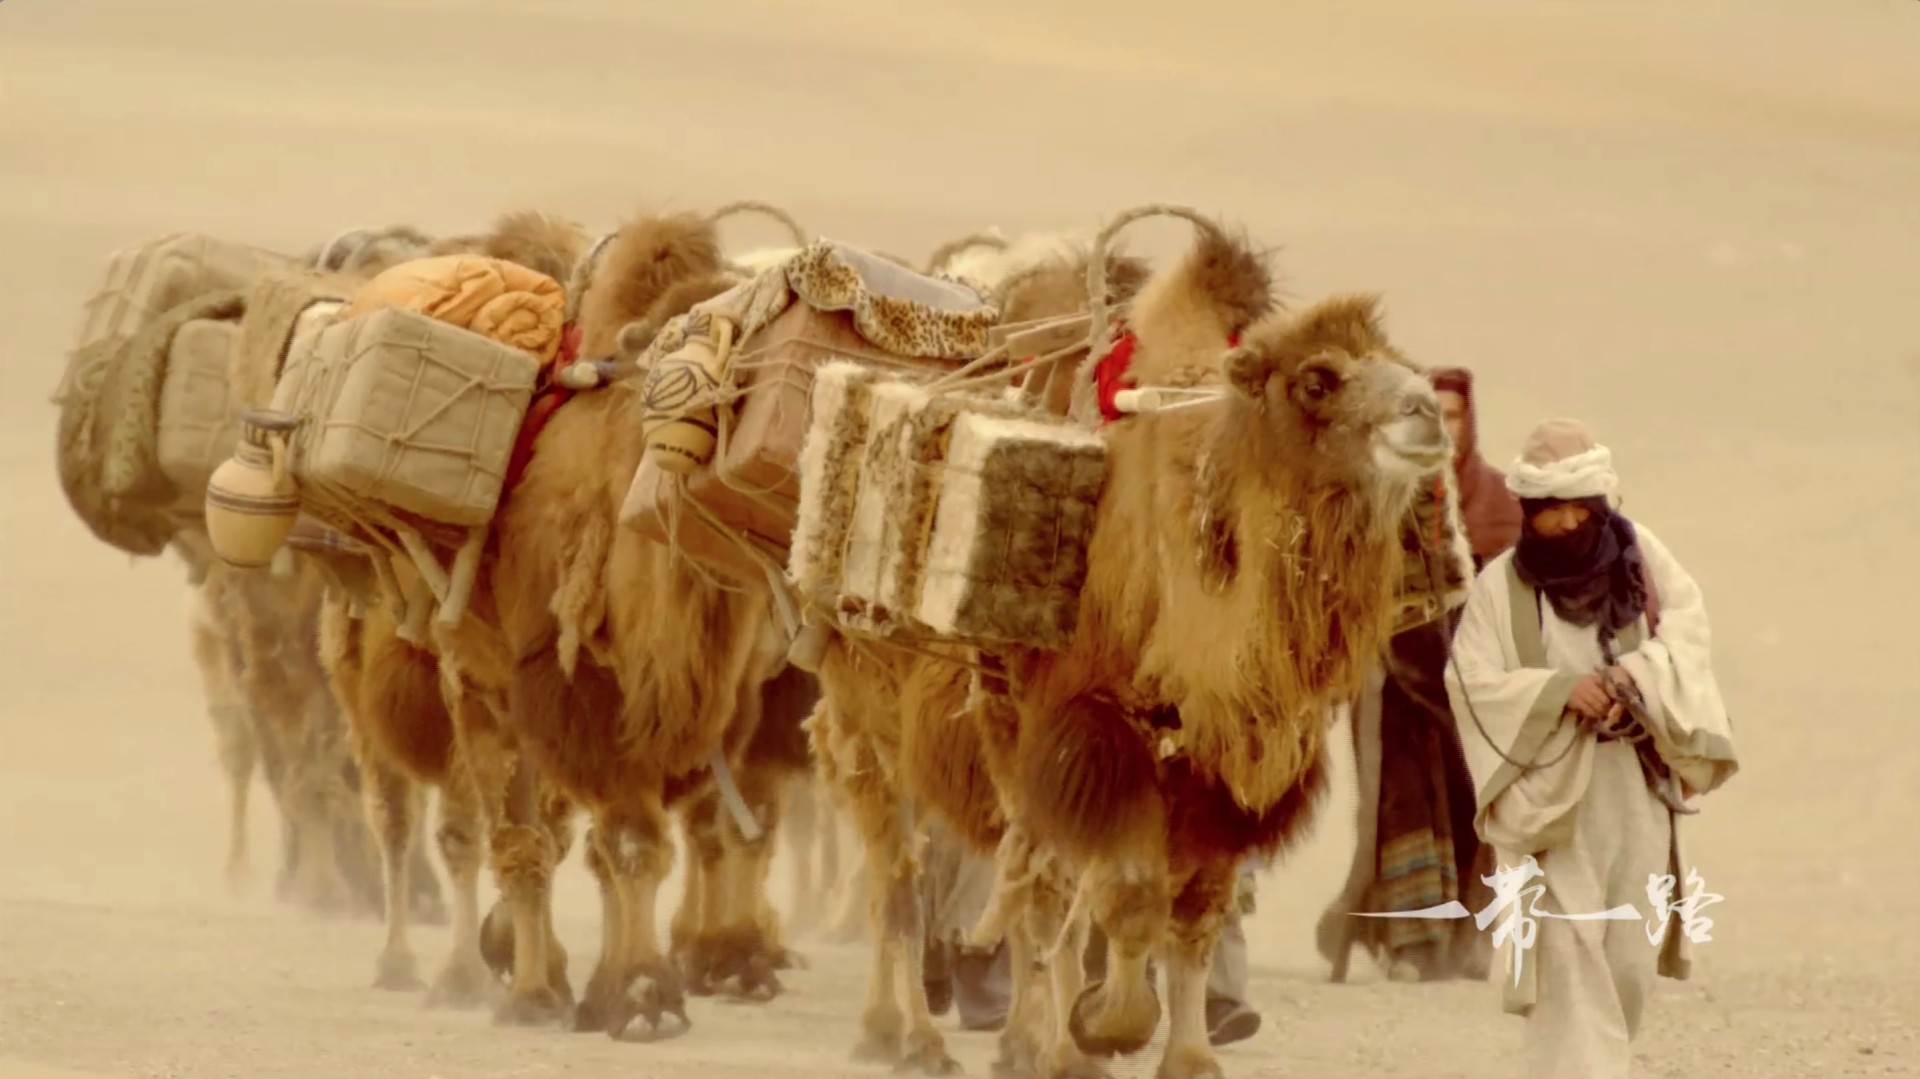 Caravan with camels passing through the desert